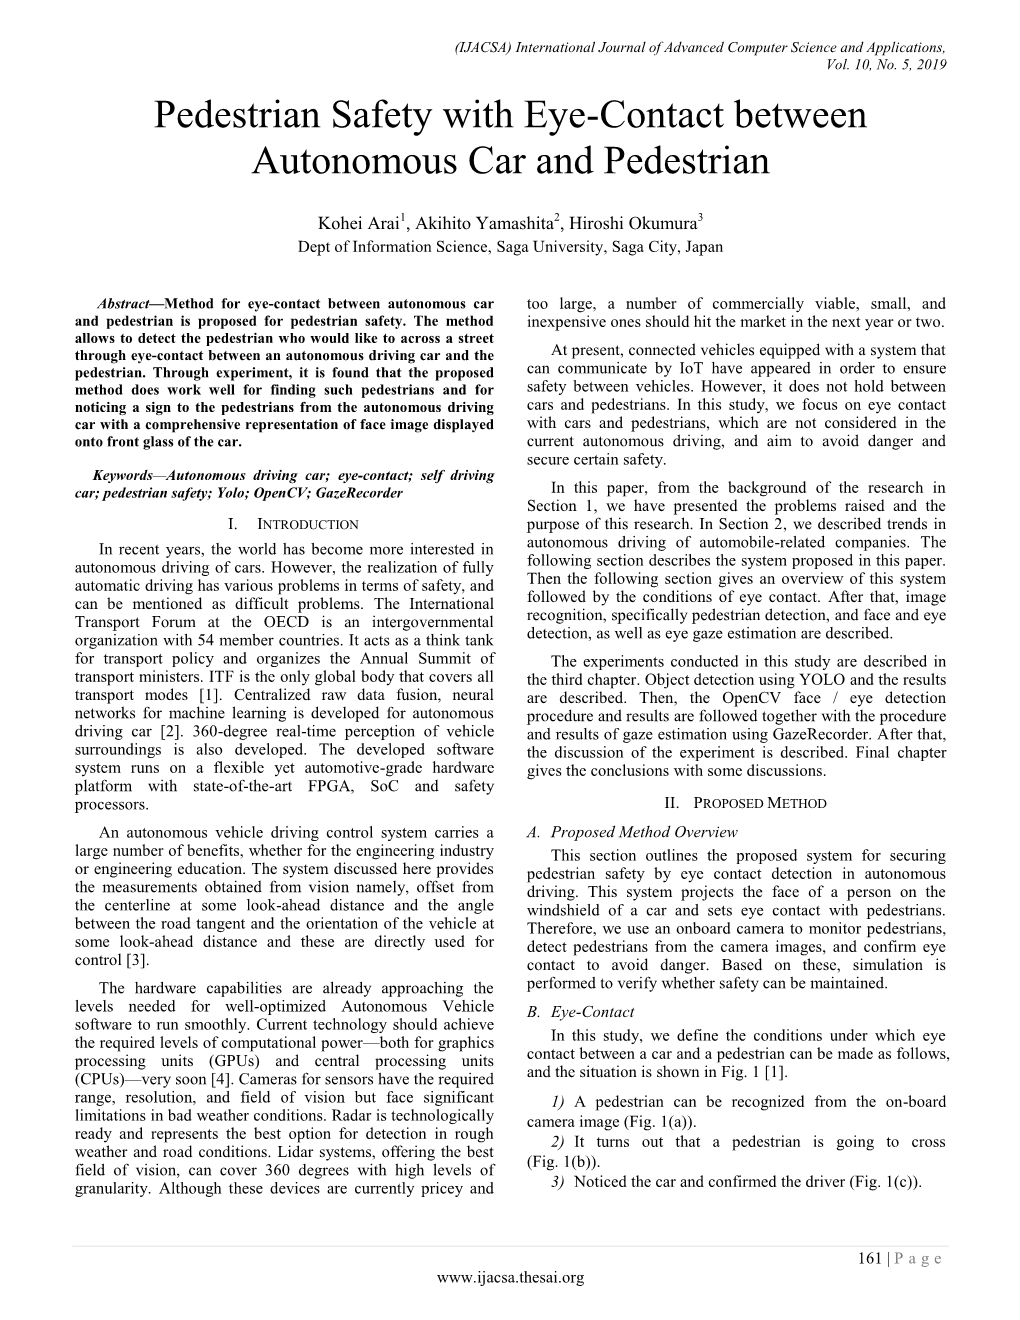 Pedestrian Safety with Eye Contact Between Autonomous Car And